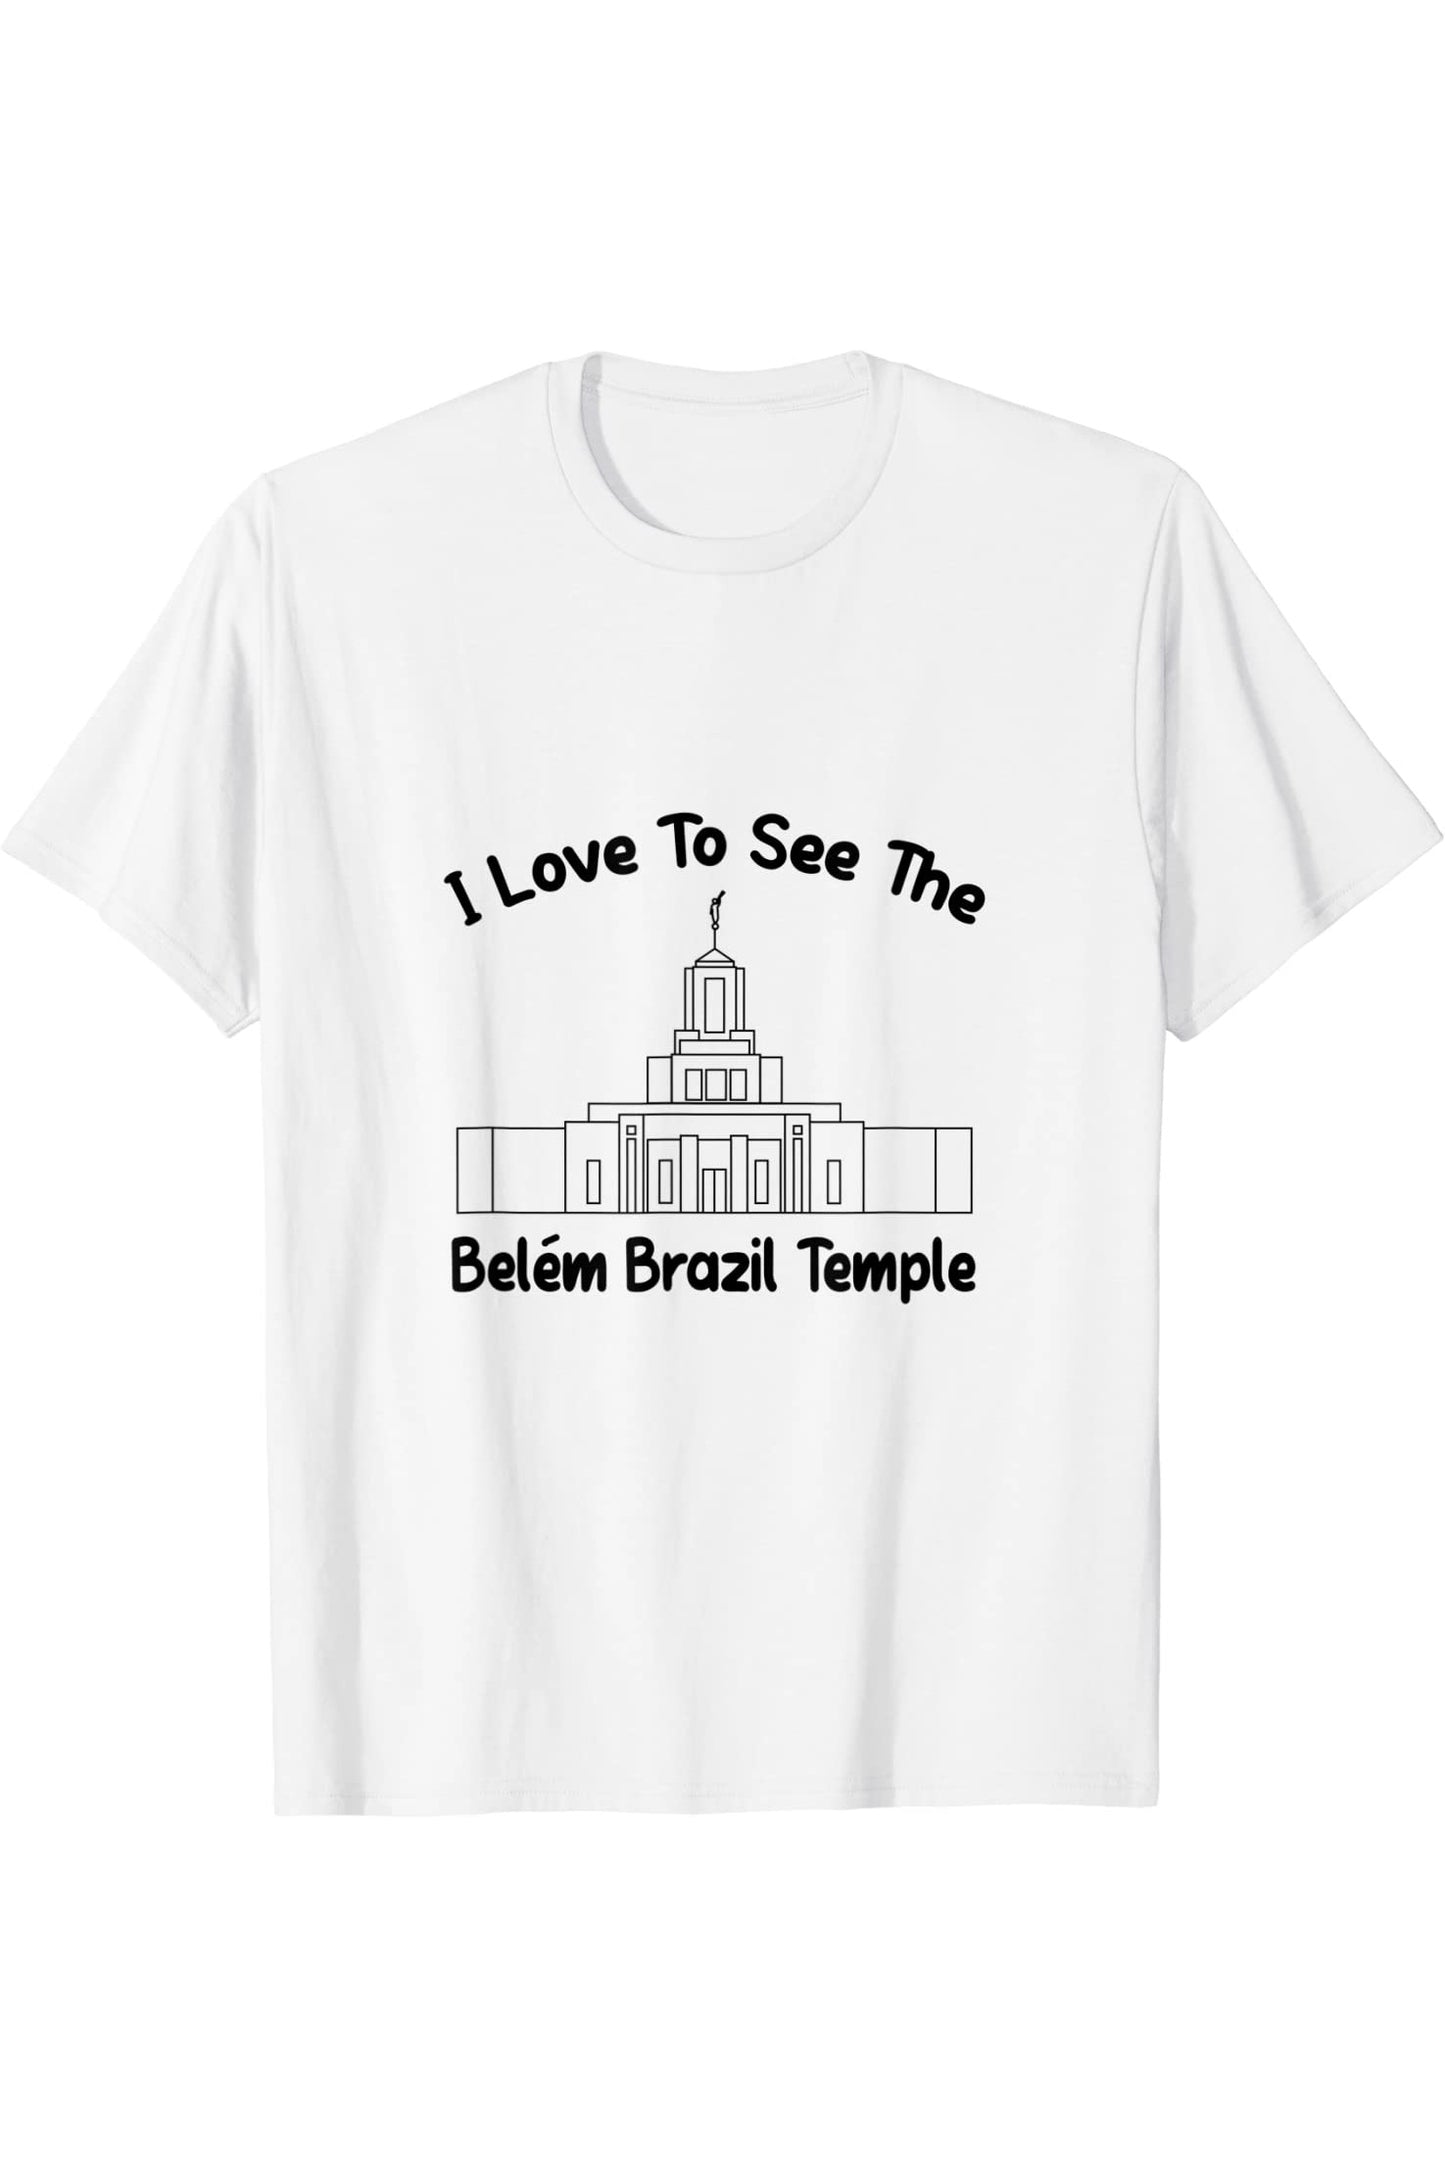 Belem Brazil Temple T-Shirt - Primary Style (English) US